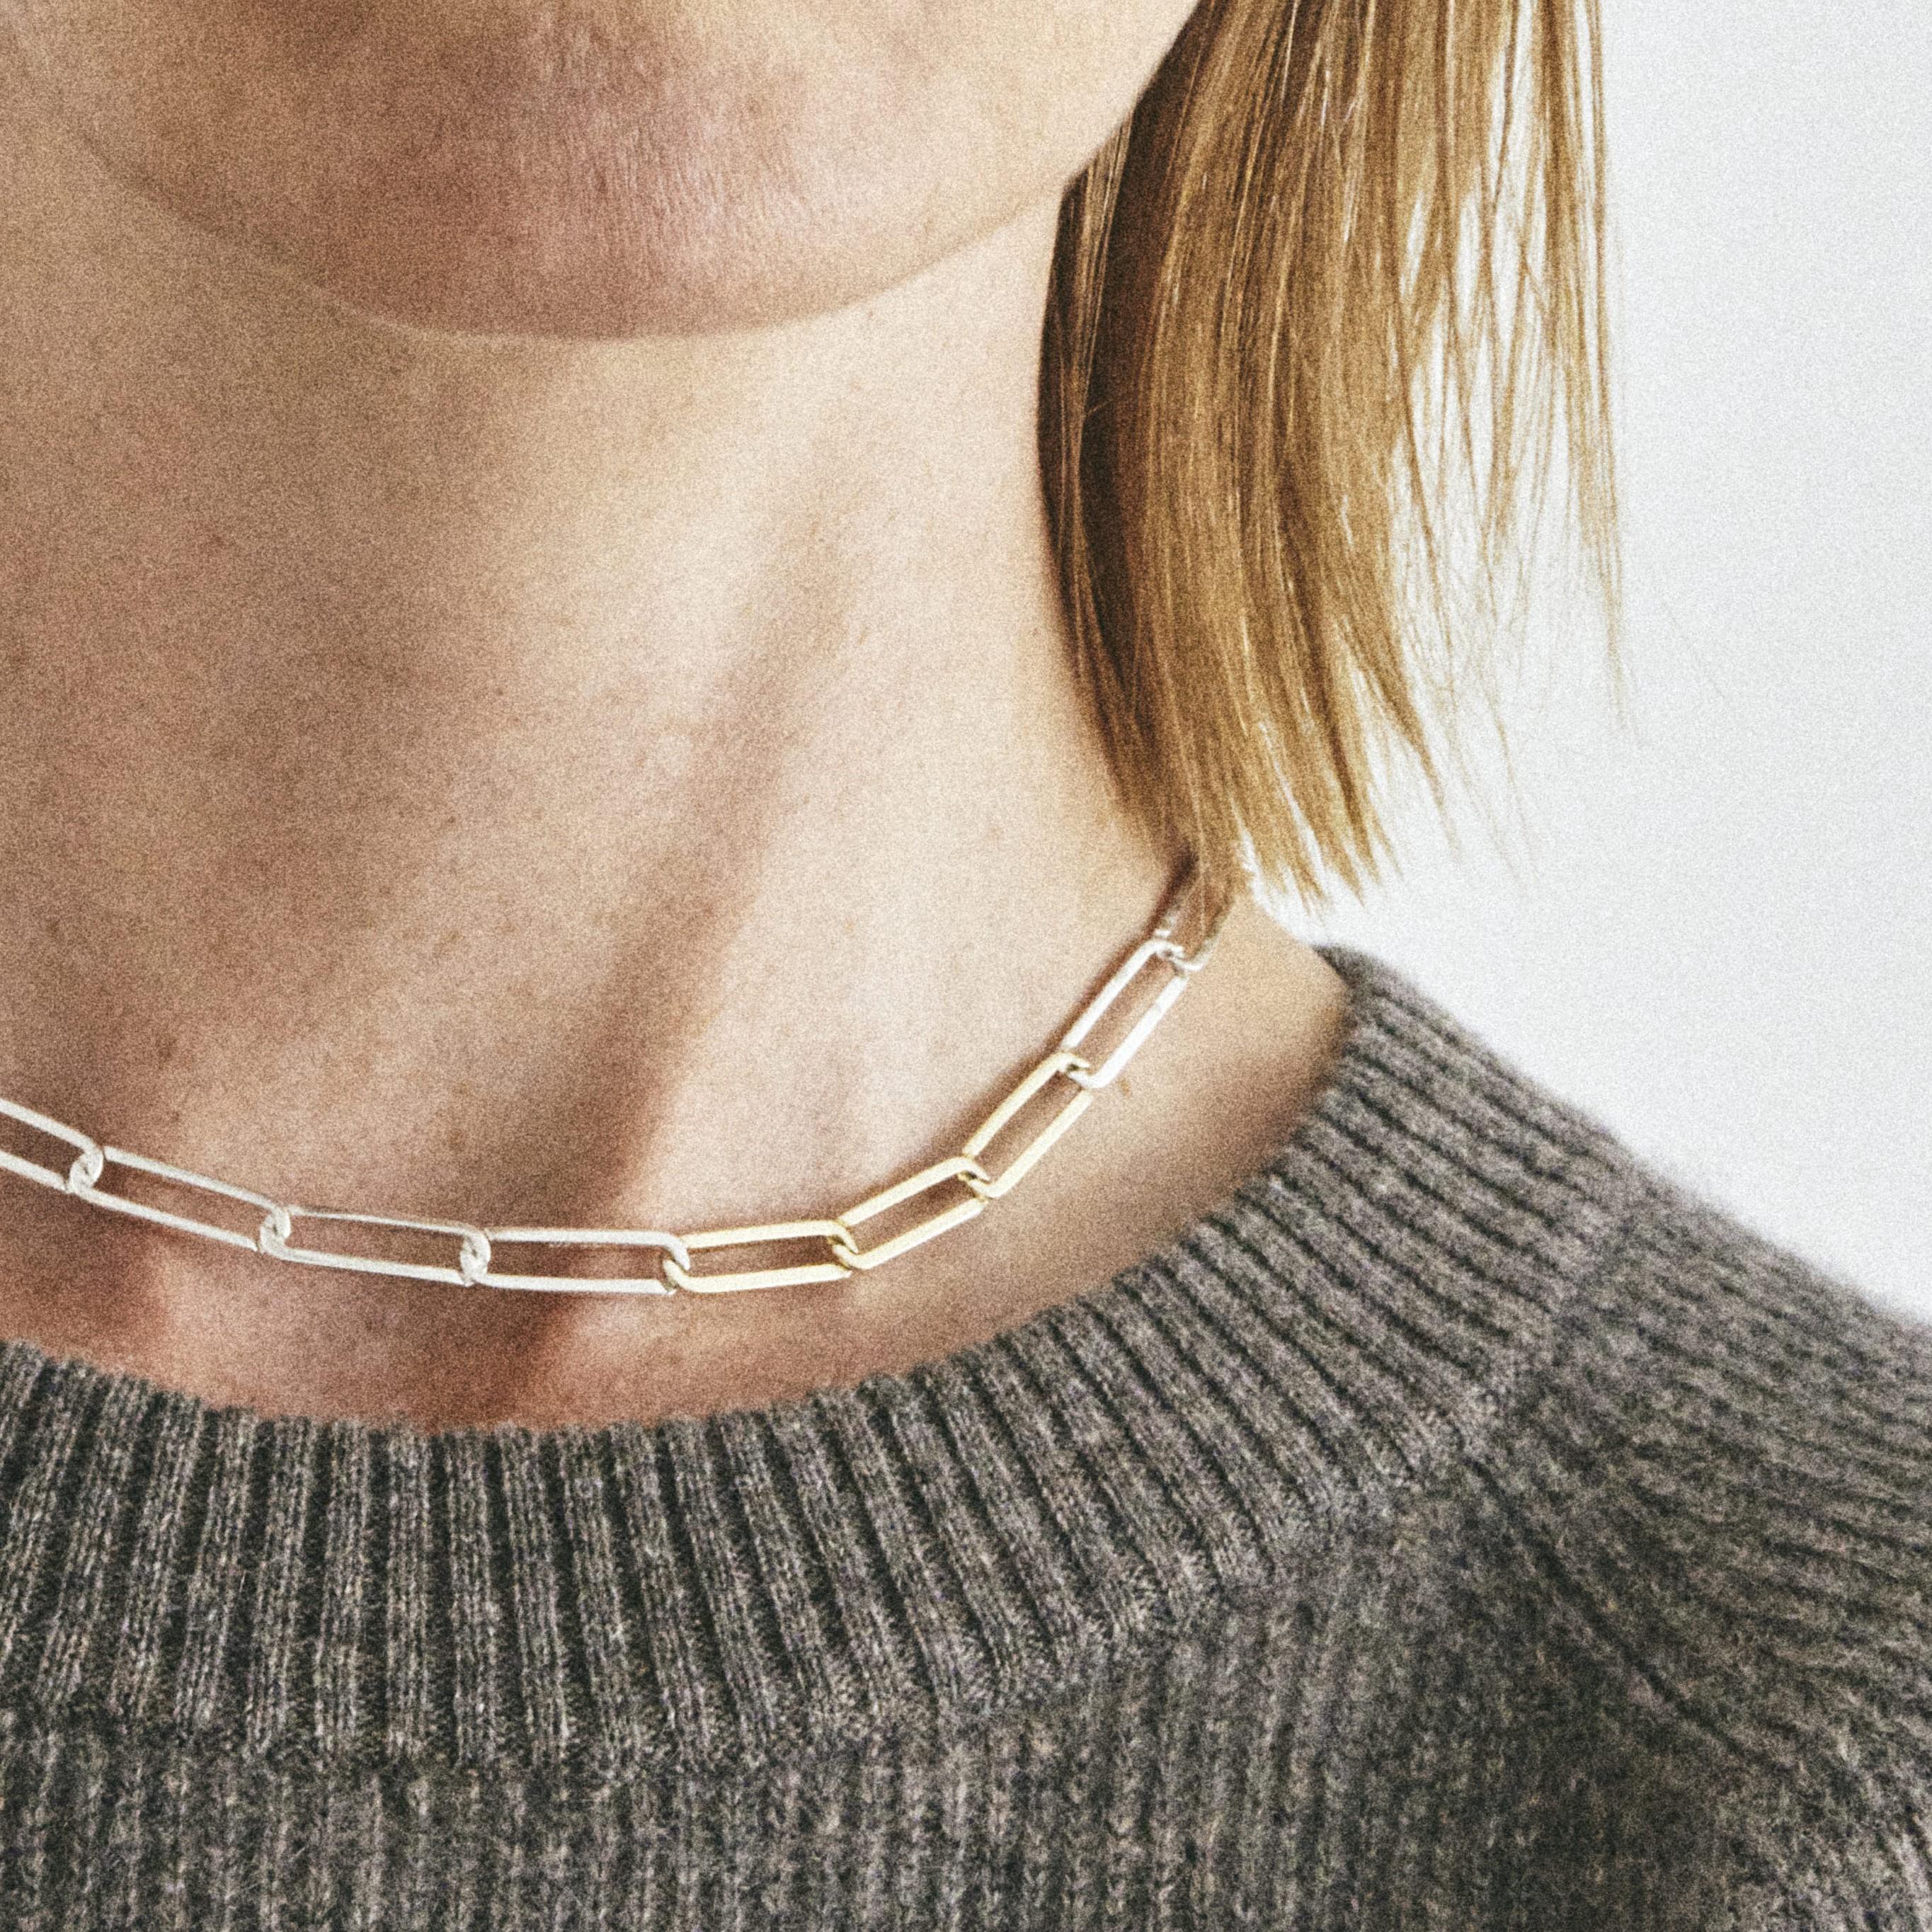 Also available in recycled 18k gold with 3 silver links and sterling silver.

A luxurious necklace in solid recycled sterling silver interposed with three links in solid, recycled 18k gold. The necklace has a relaxed fit, so you can wear it directly